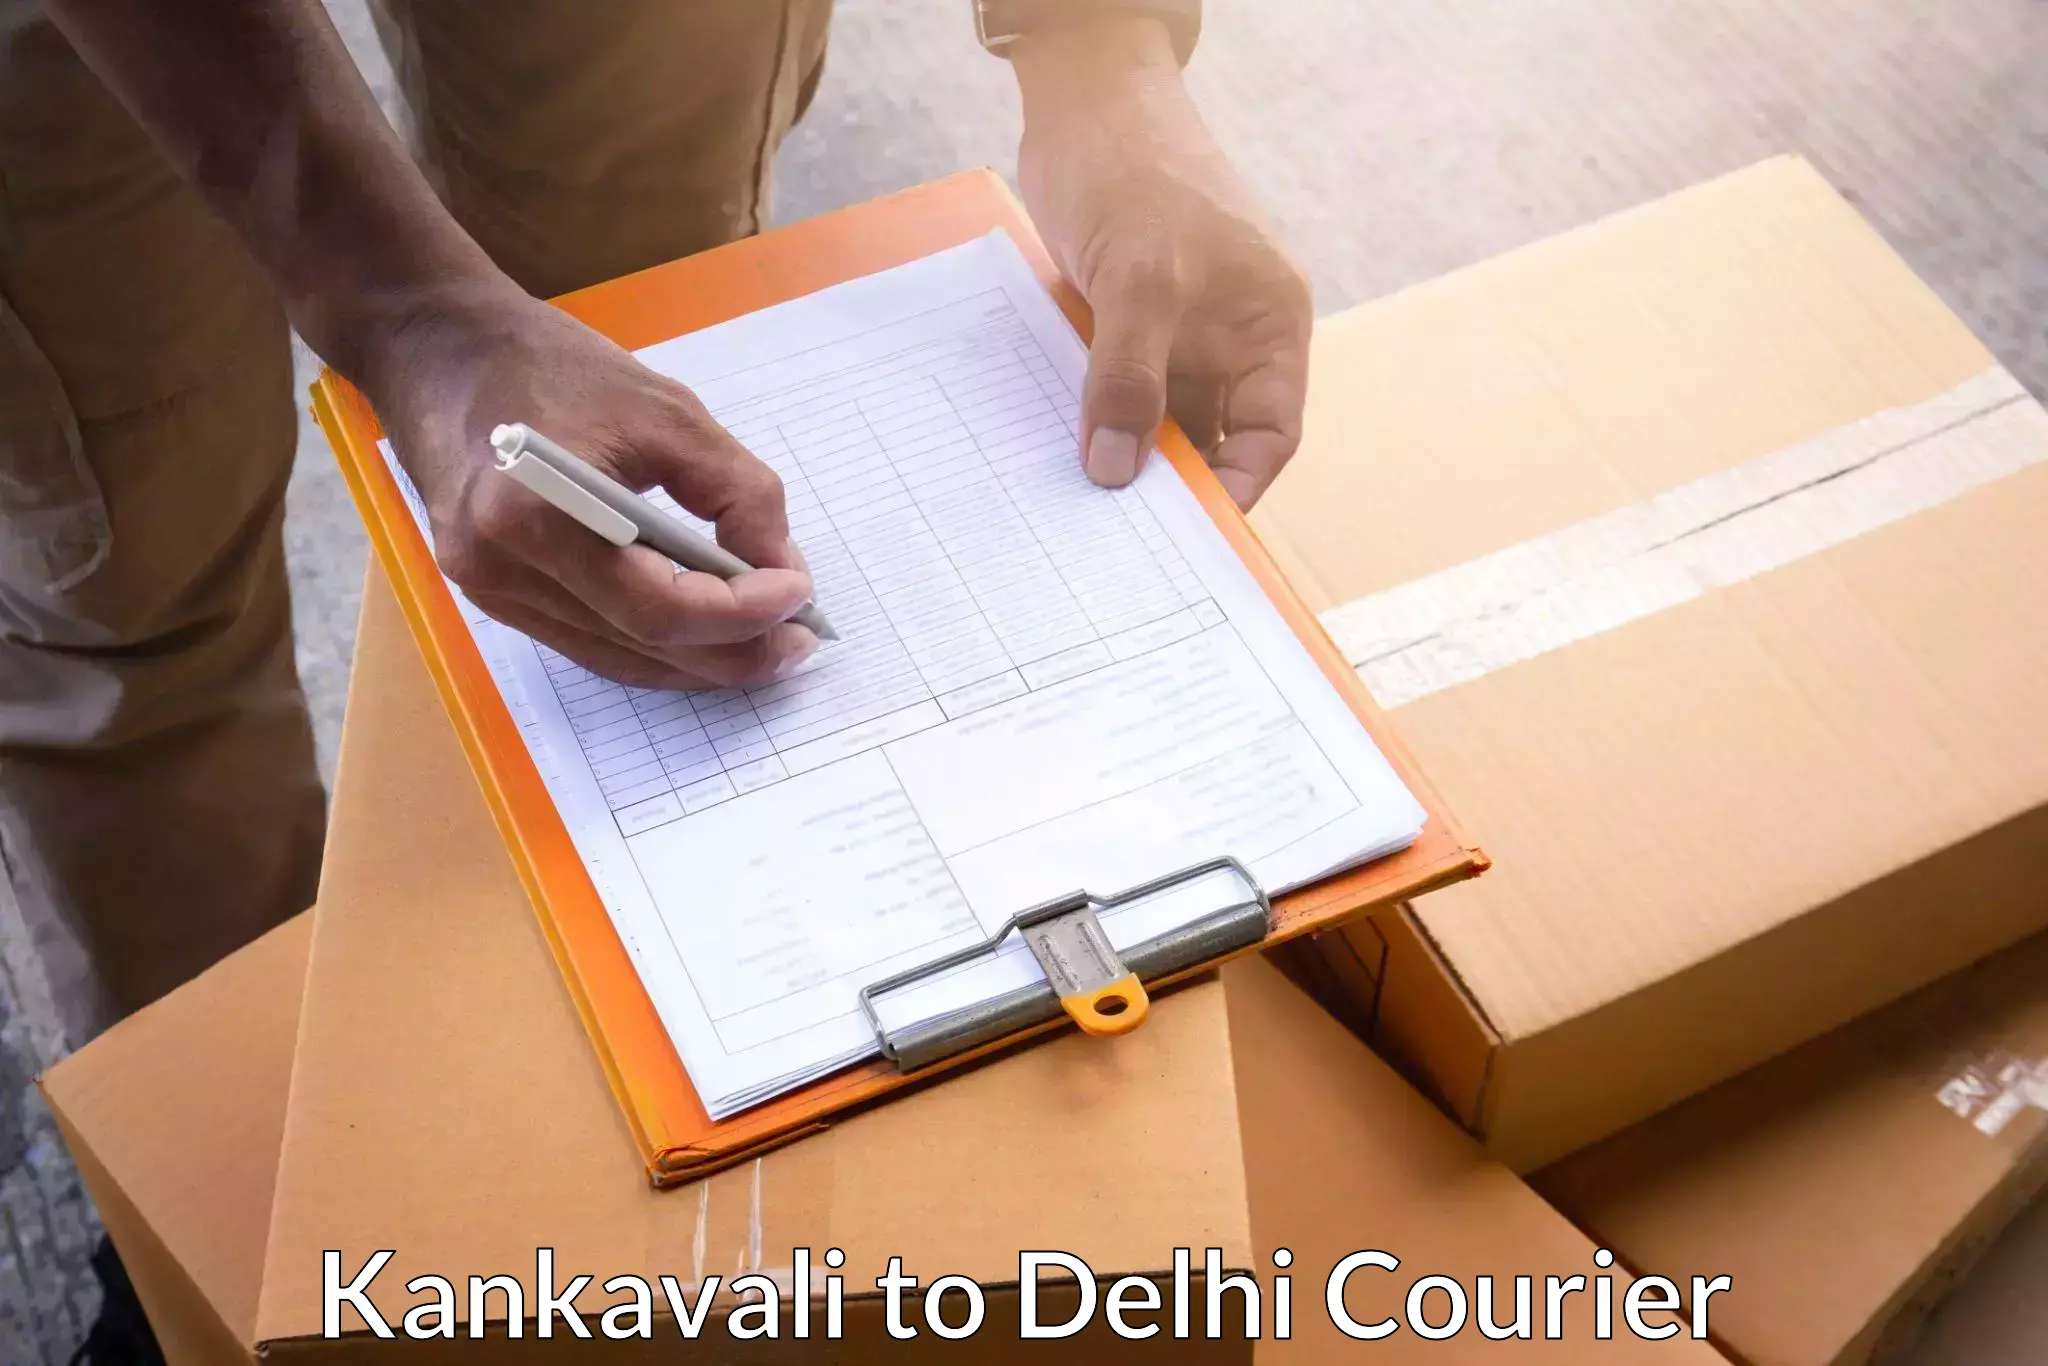 Express delivery network Kankavali to University of Delhi